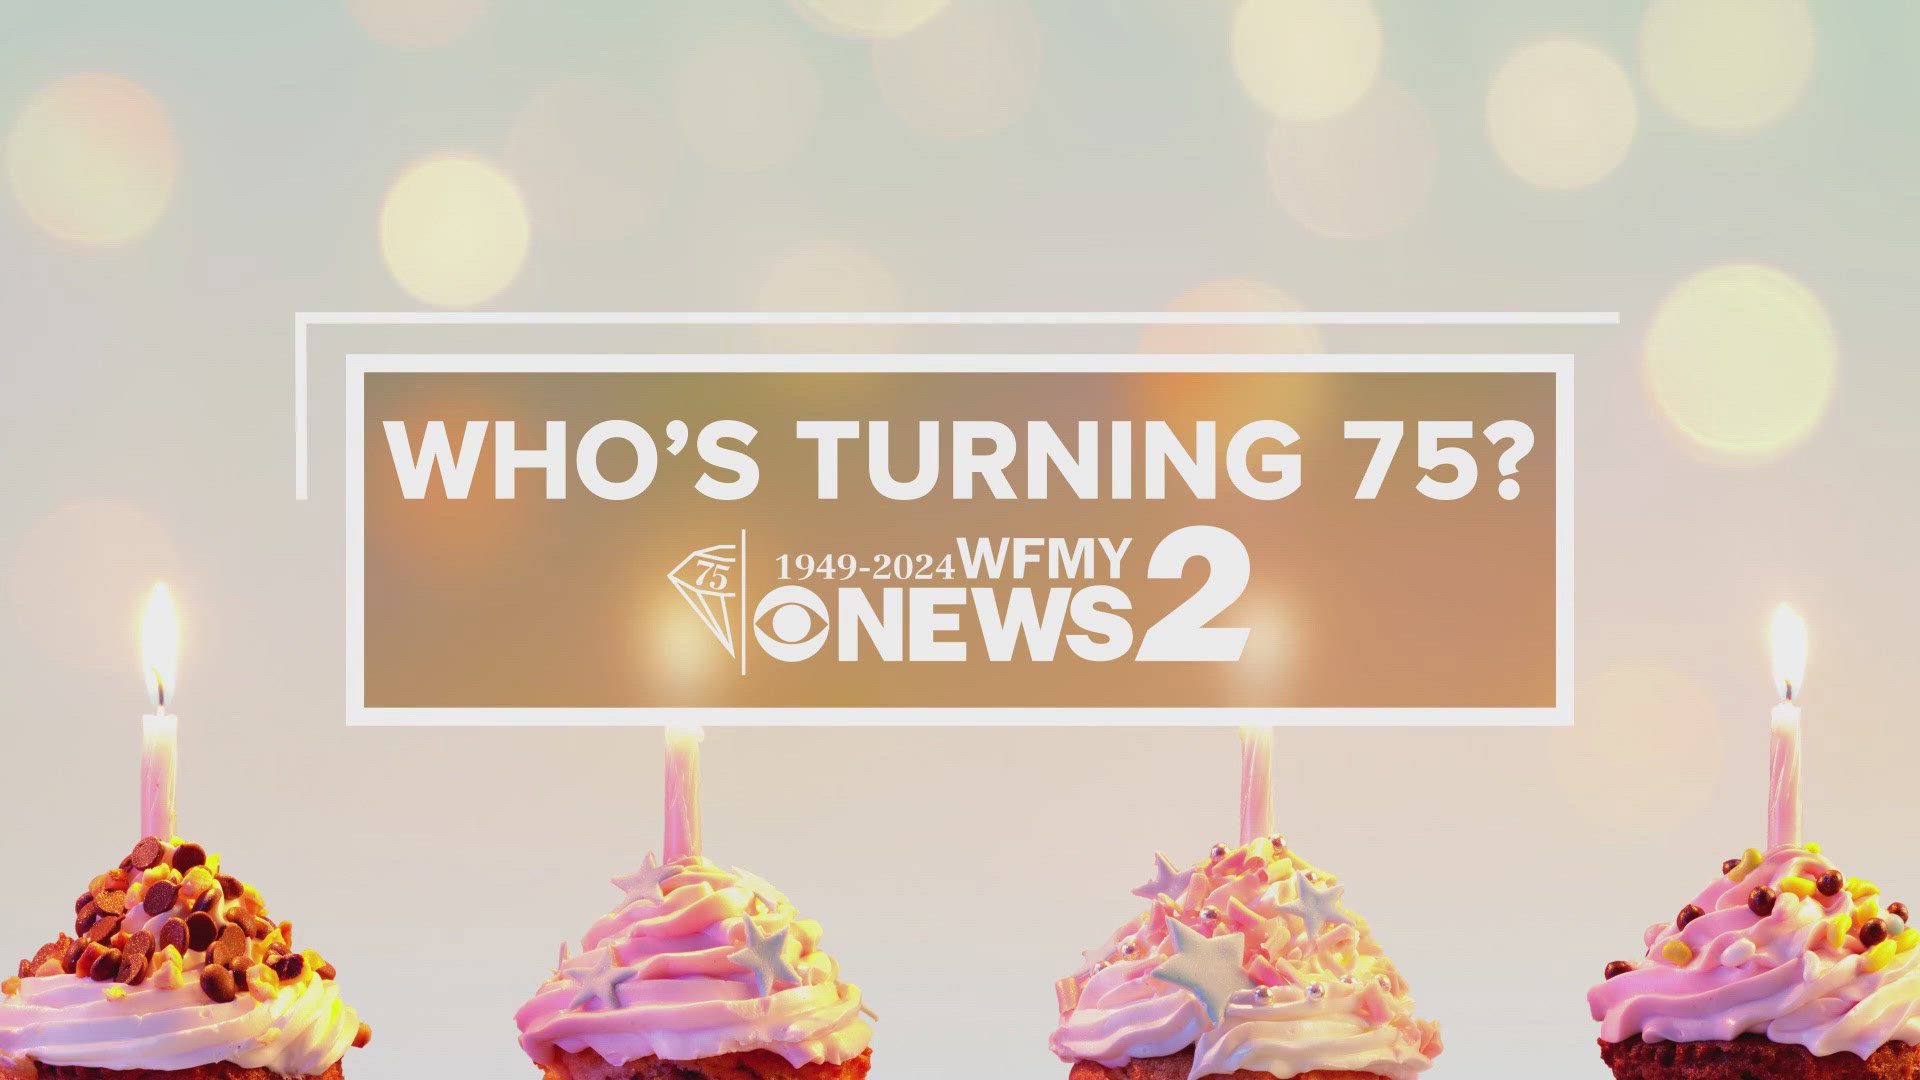 WFMY News 2  is turning 75 this year and wants to wish viewers turning 75 too, a happy birthday.